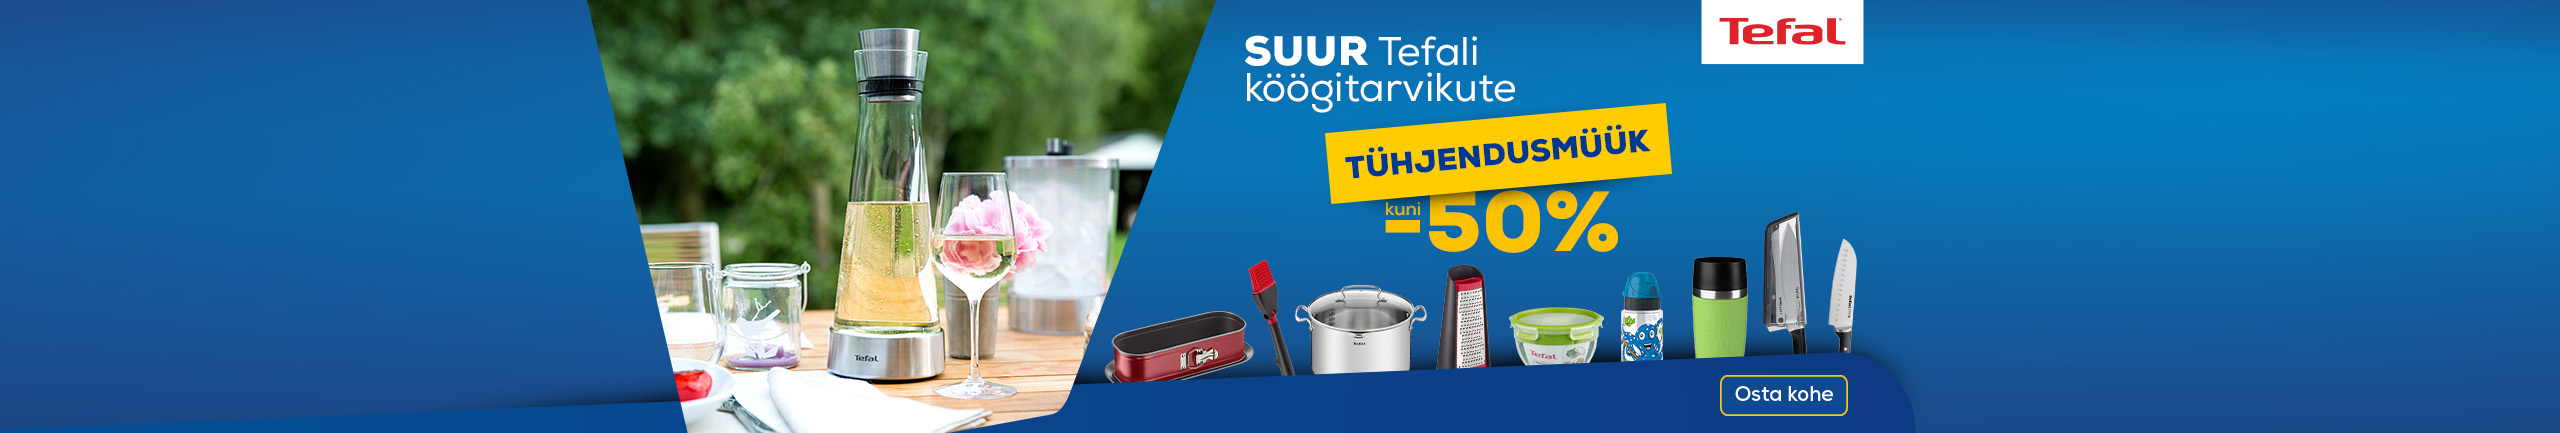 Tefal cookware discount up to -50%!